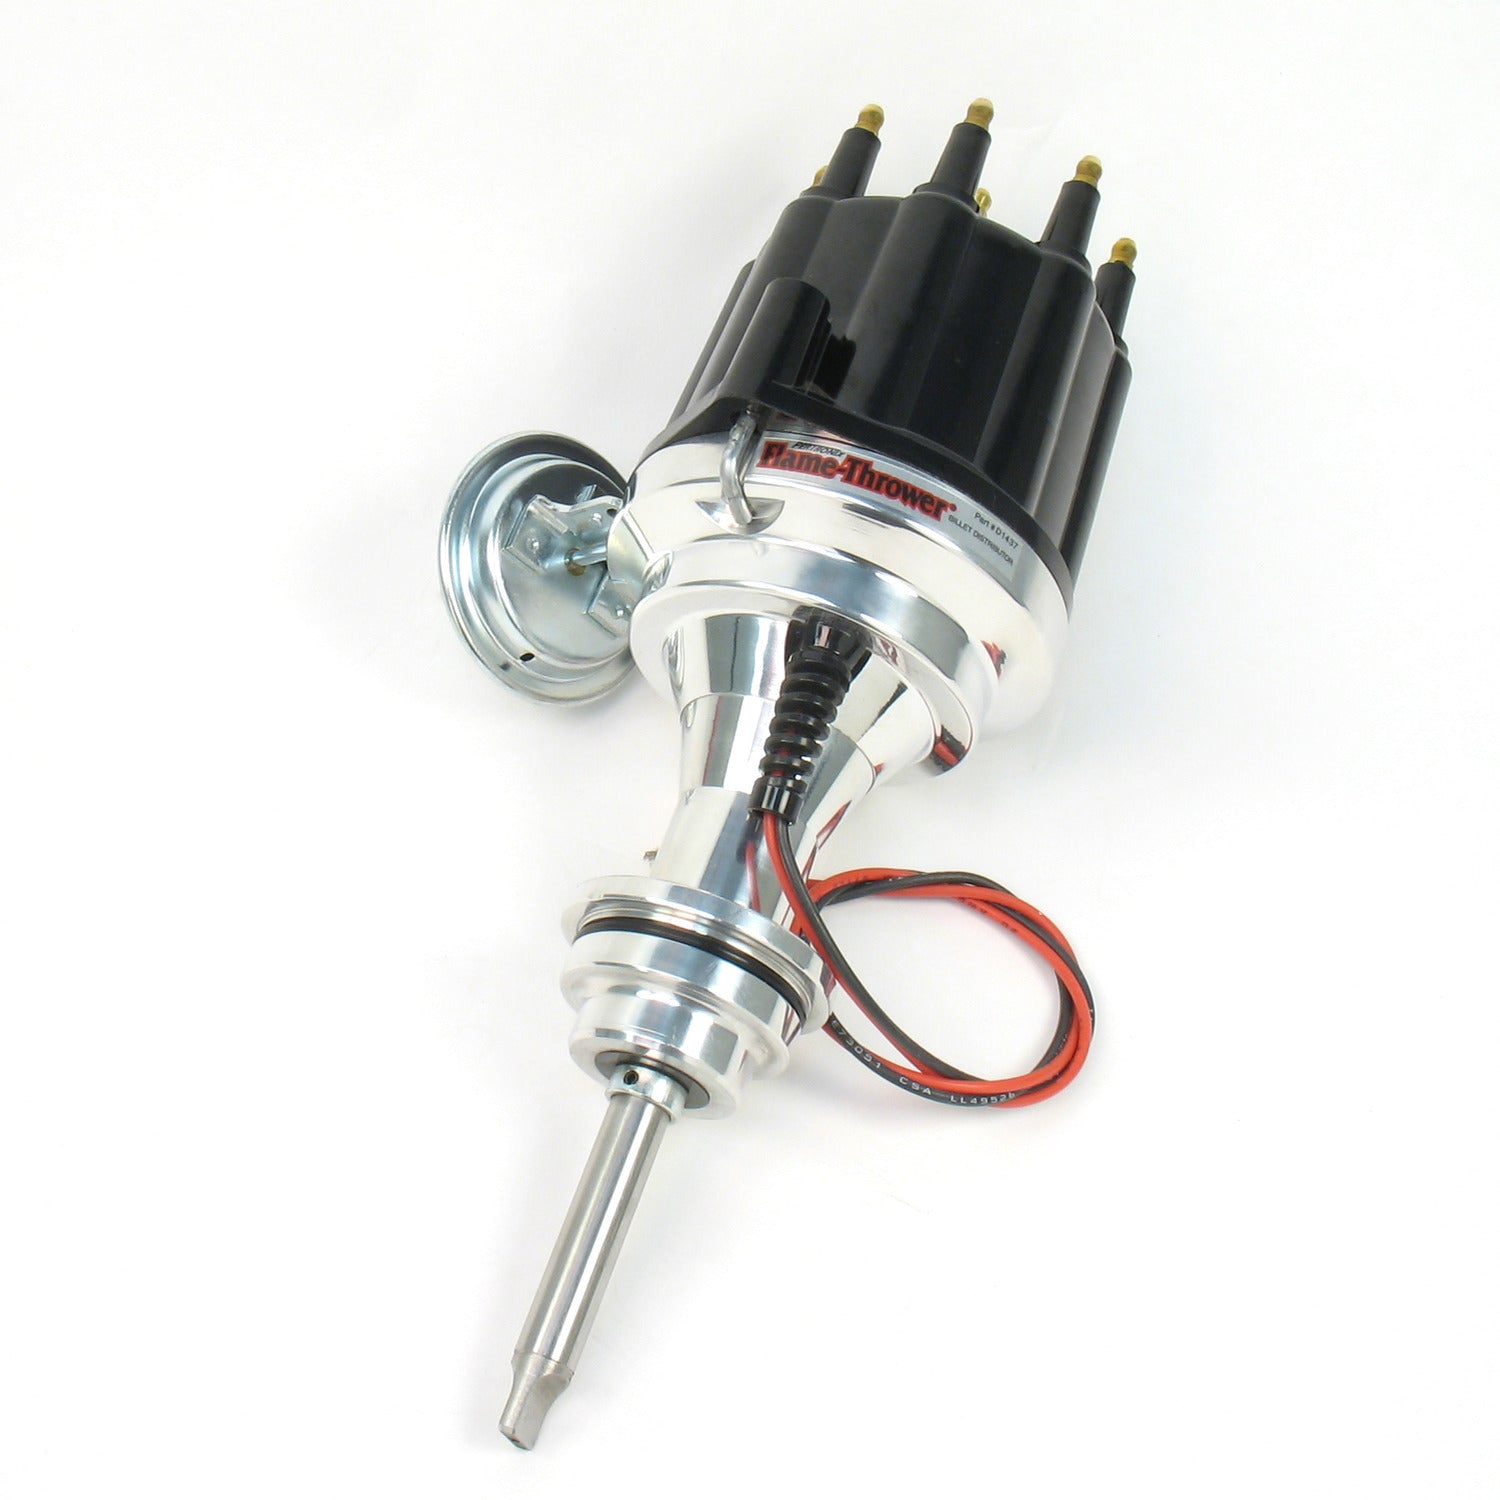 PerTronix D7143710 Flame-Thrower Electronic Distributor Billet Chrysler/Dodge/Plymouth 426-440 with Ignitor III Vacuum Advance Black Male Cap